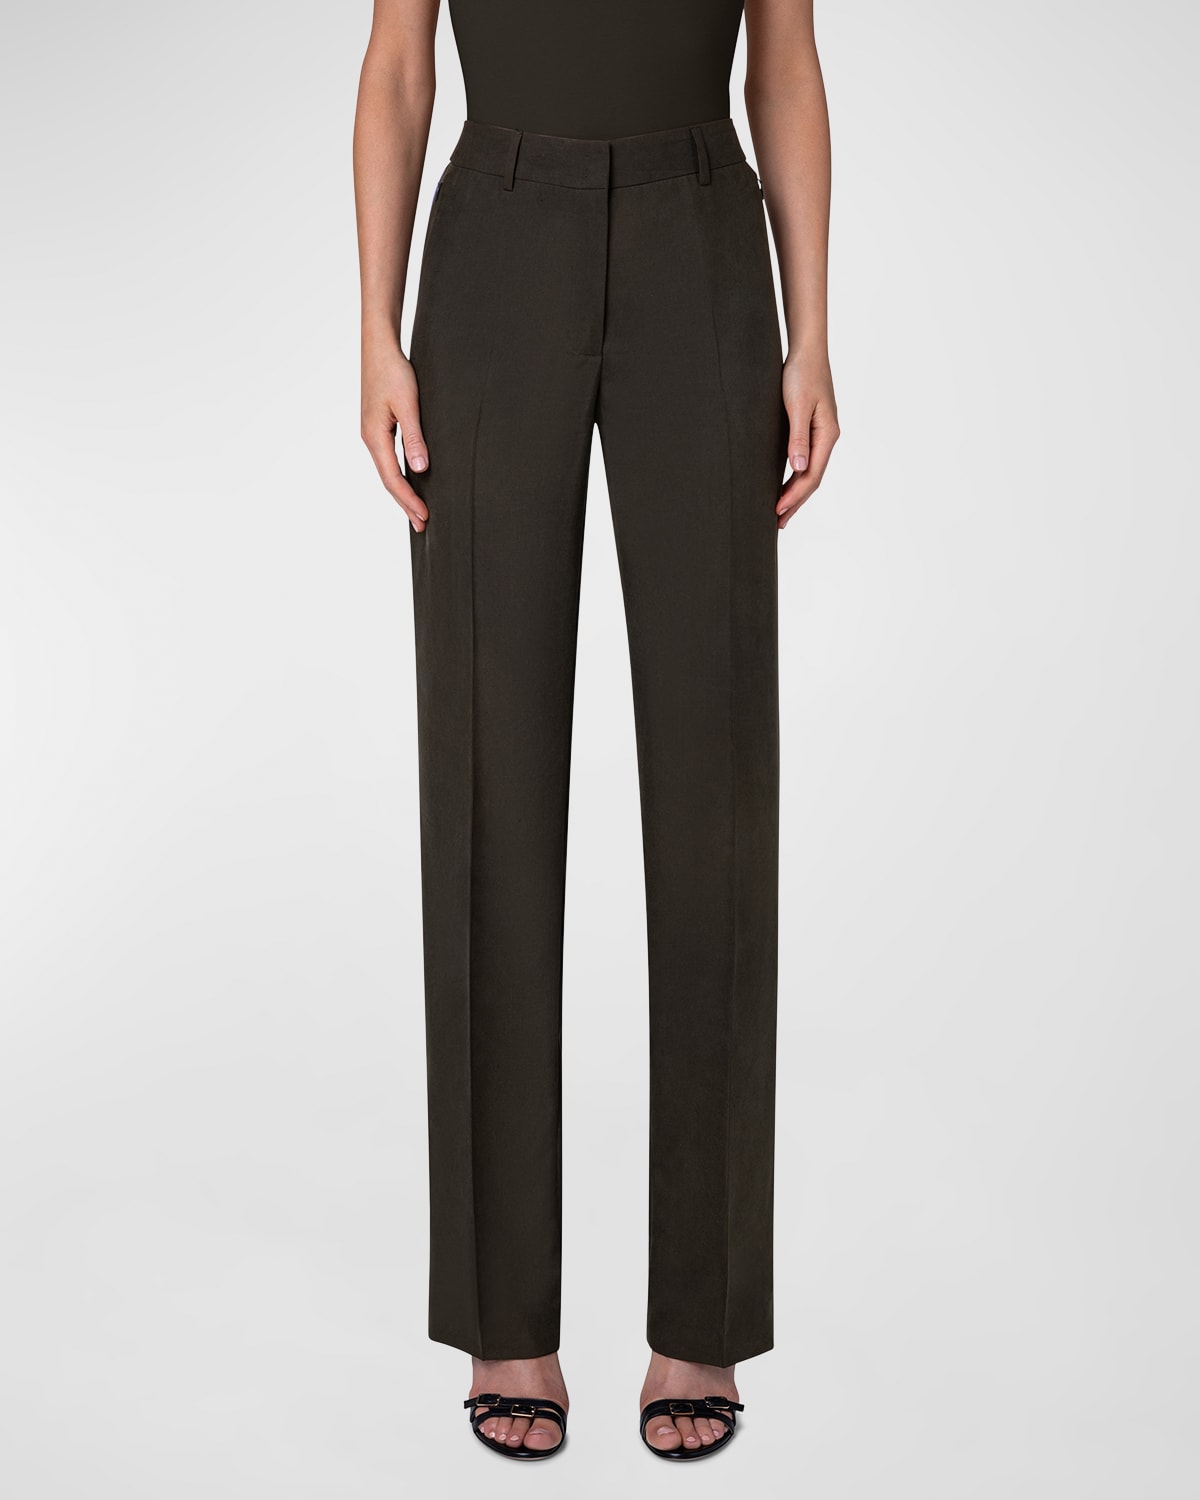 Womens Clothing Trousers Nue Nima Silk Trousers in Black Slacks and Chinos Straight-leg trousers 